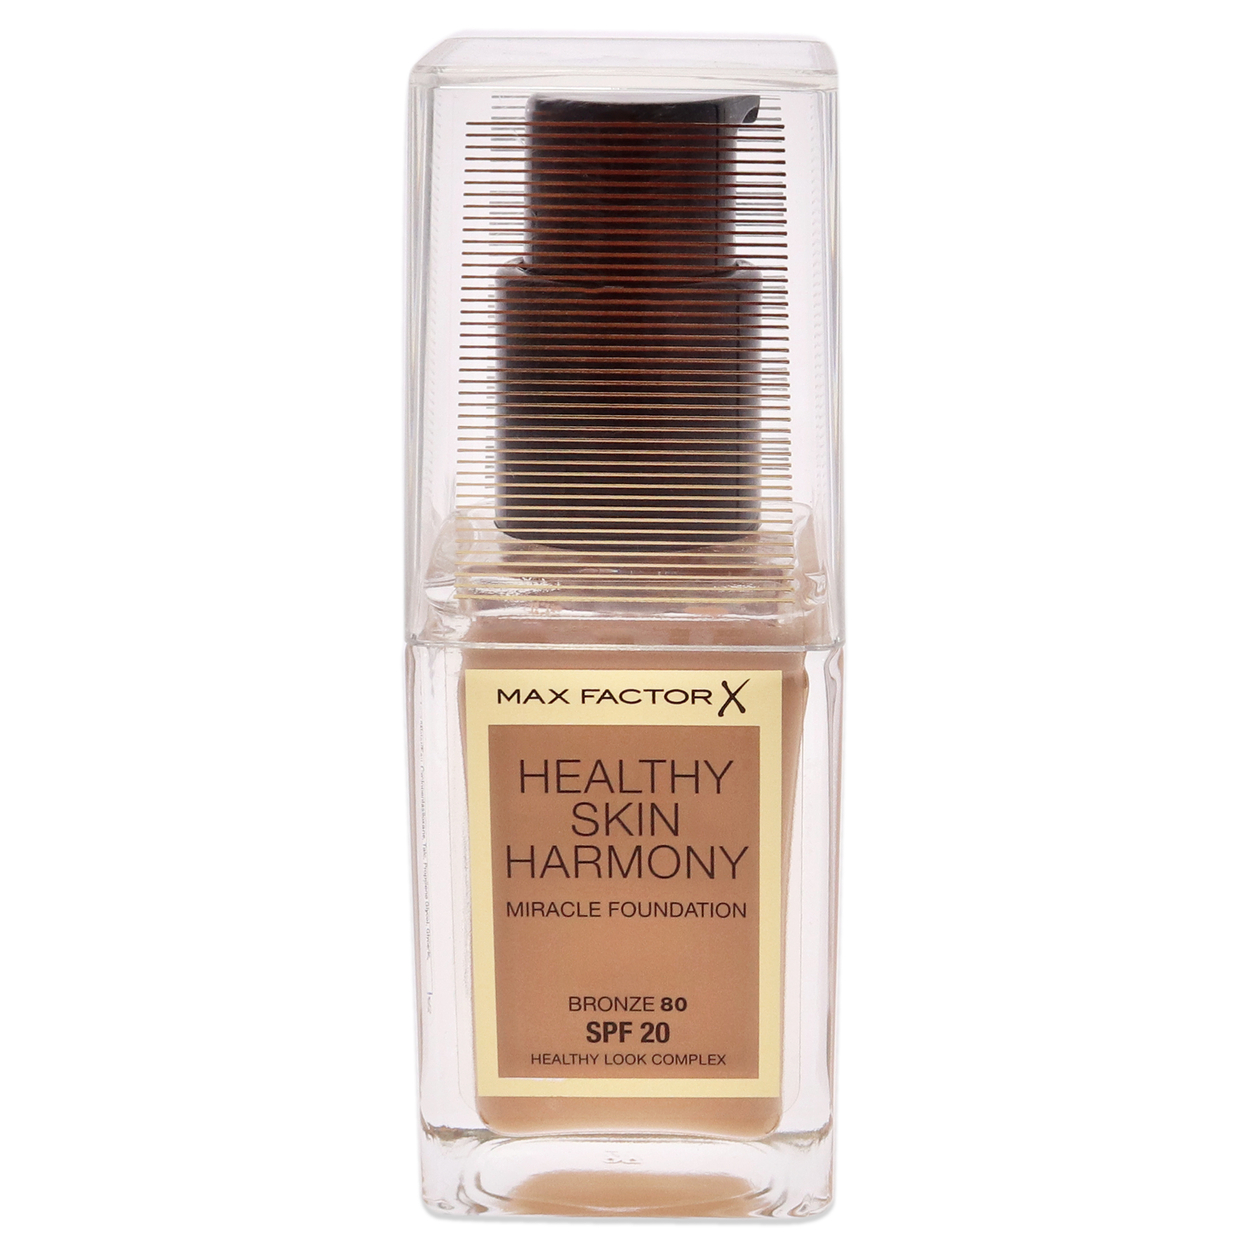 Max Factor Healthy Skin Harmony Miracle Foundation SPF 20 - 80 Bronze 1 Oz